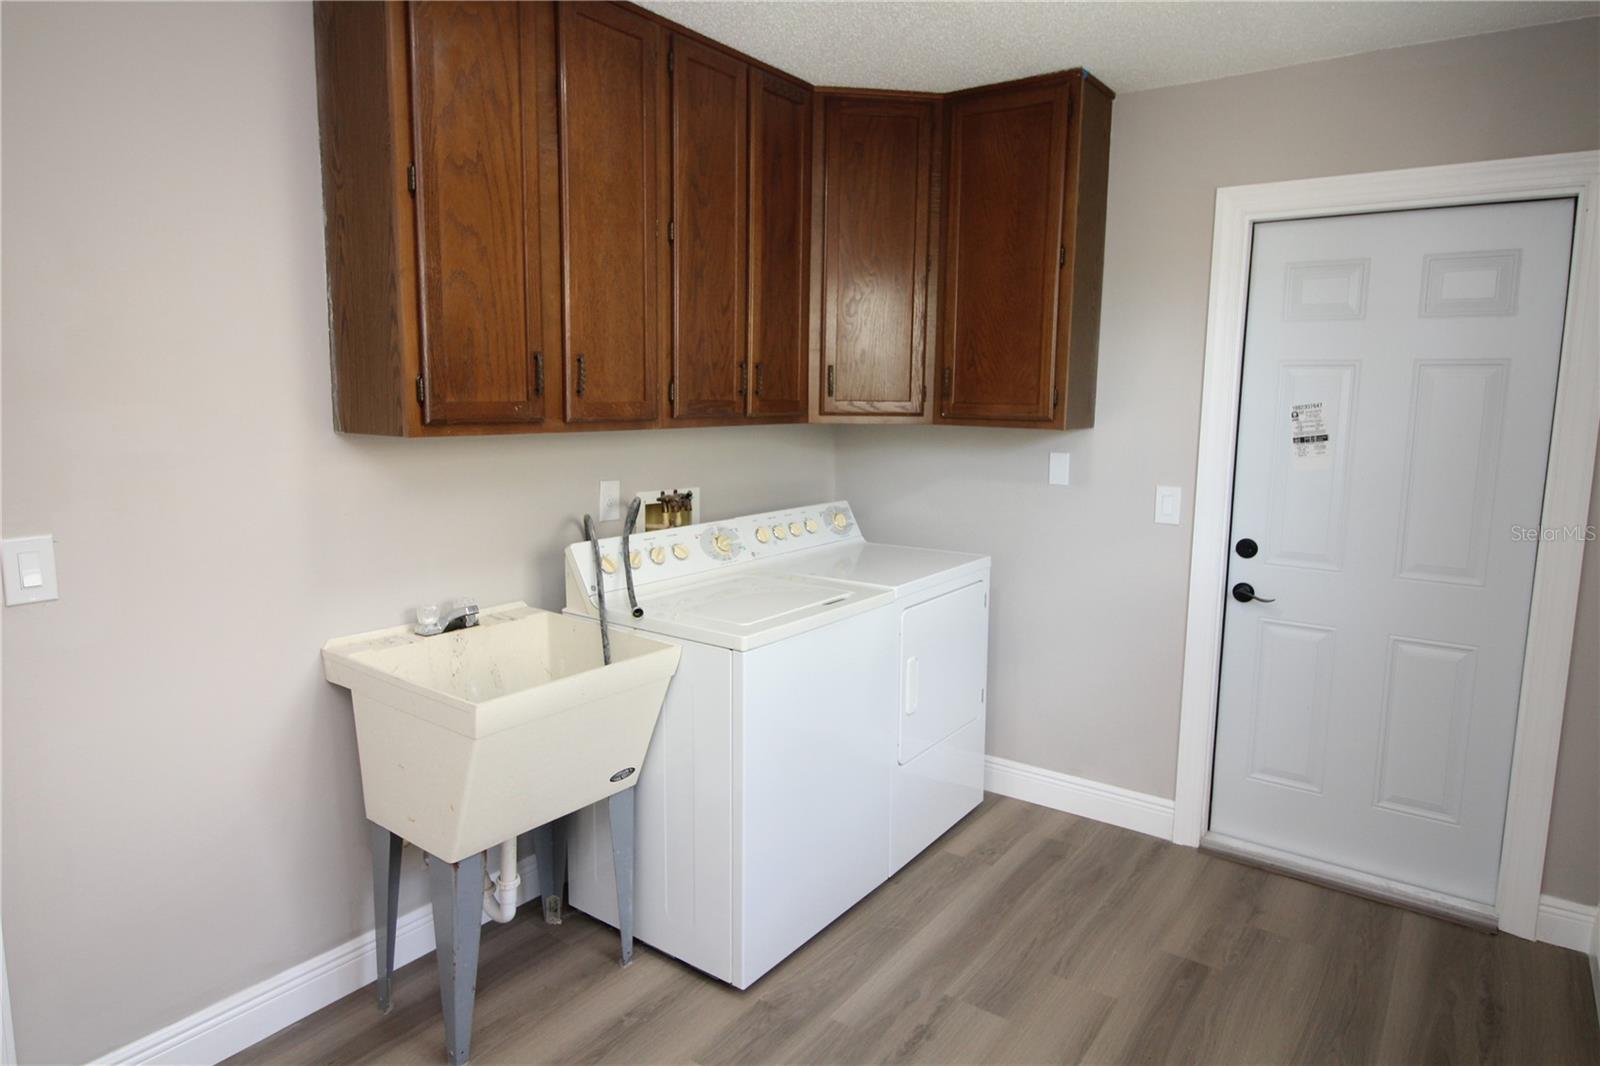 Note cabinets and utility sink